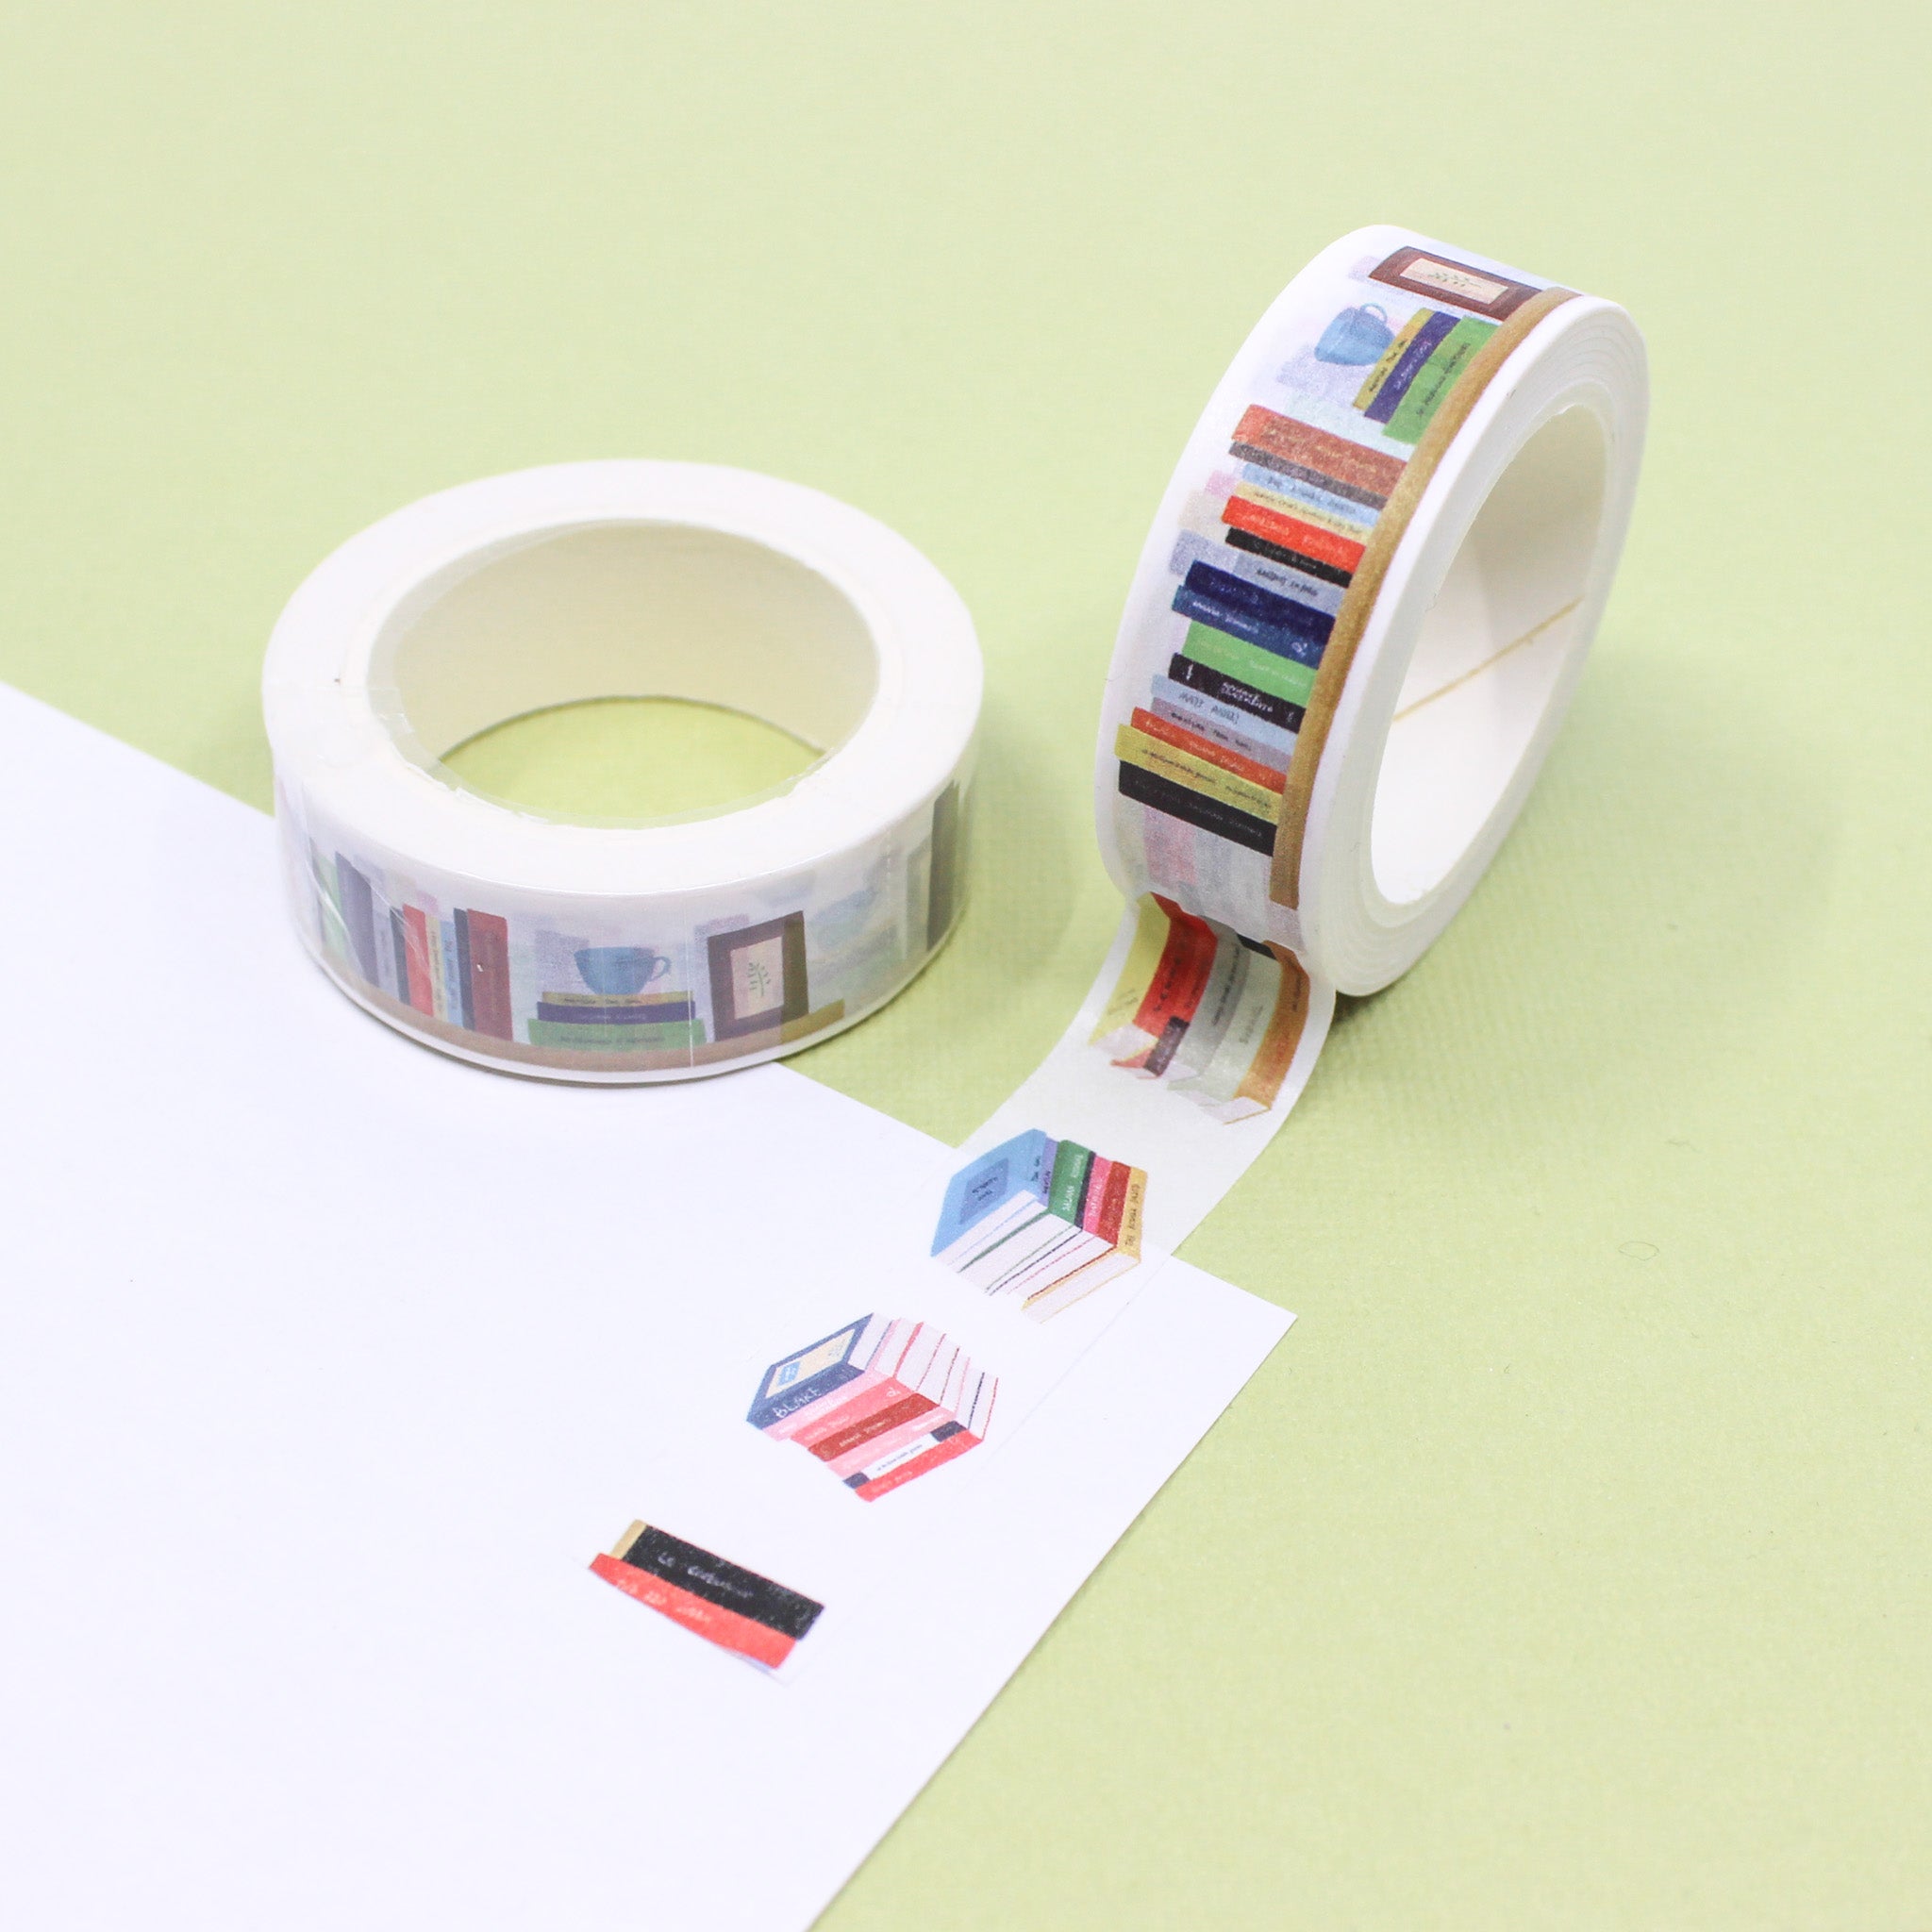 This is a library books pattern washi tape from BBB Supplies Craft Shop